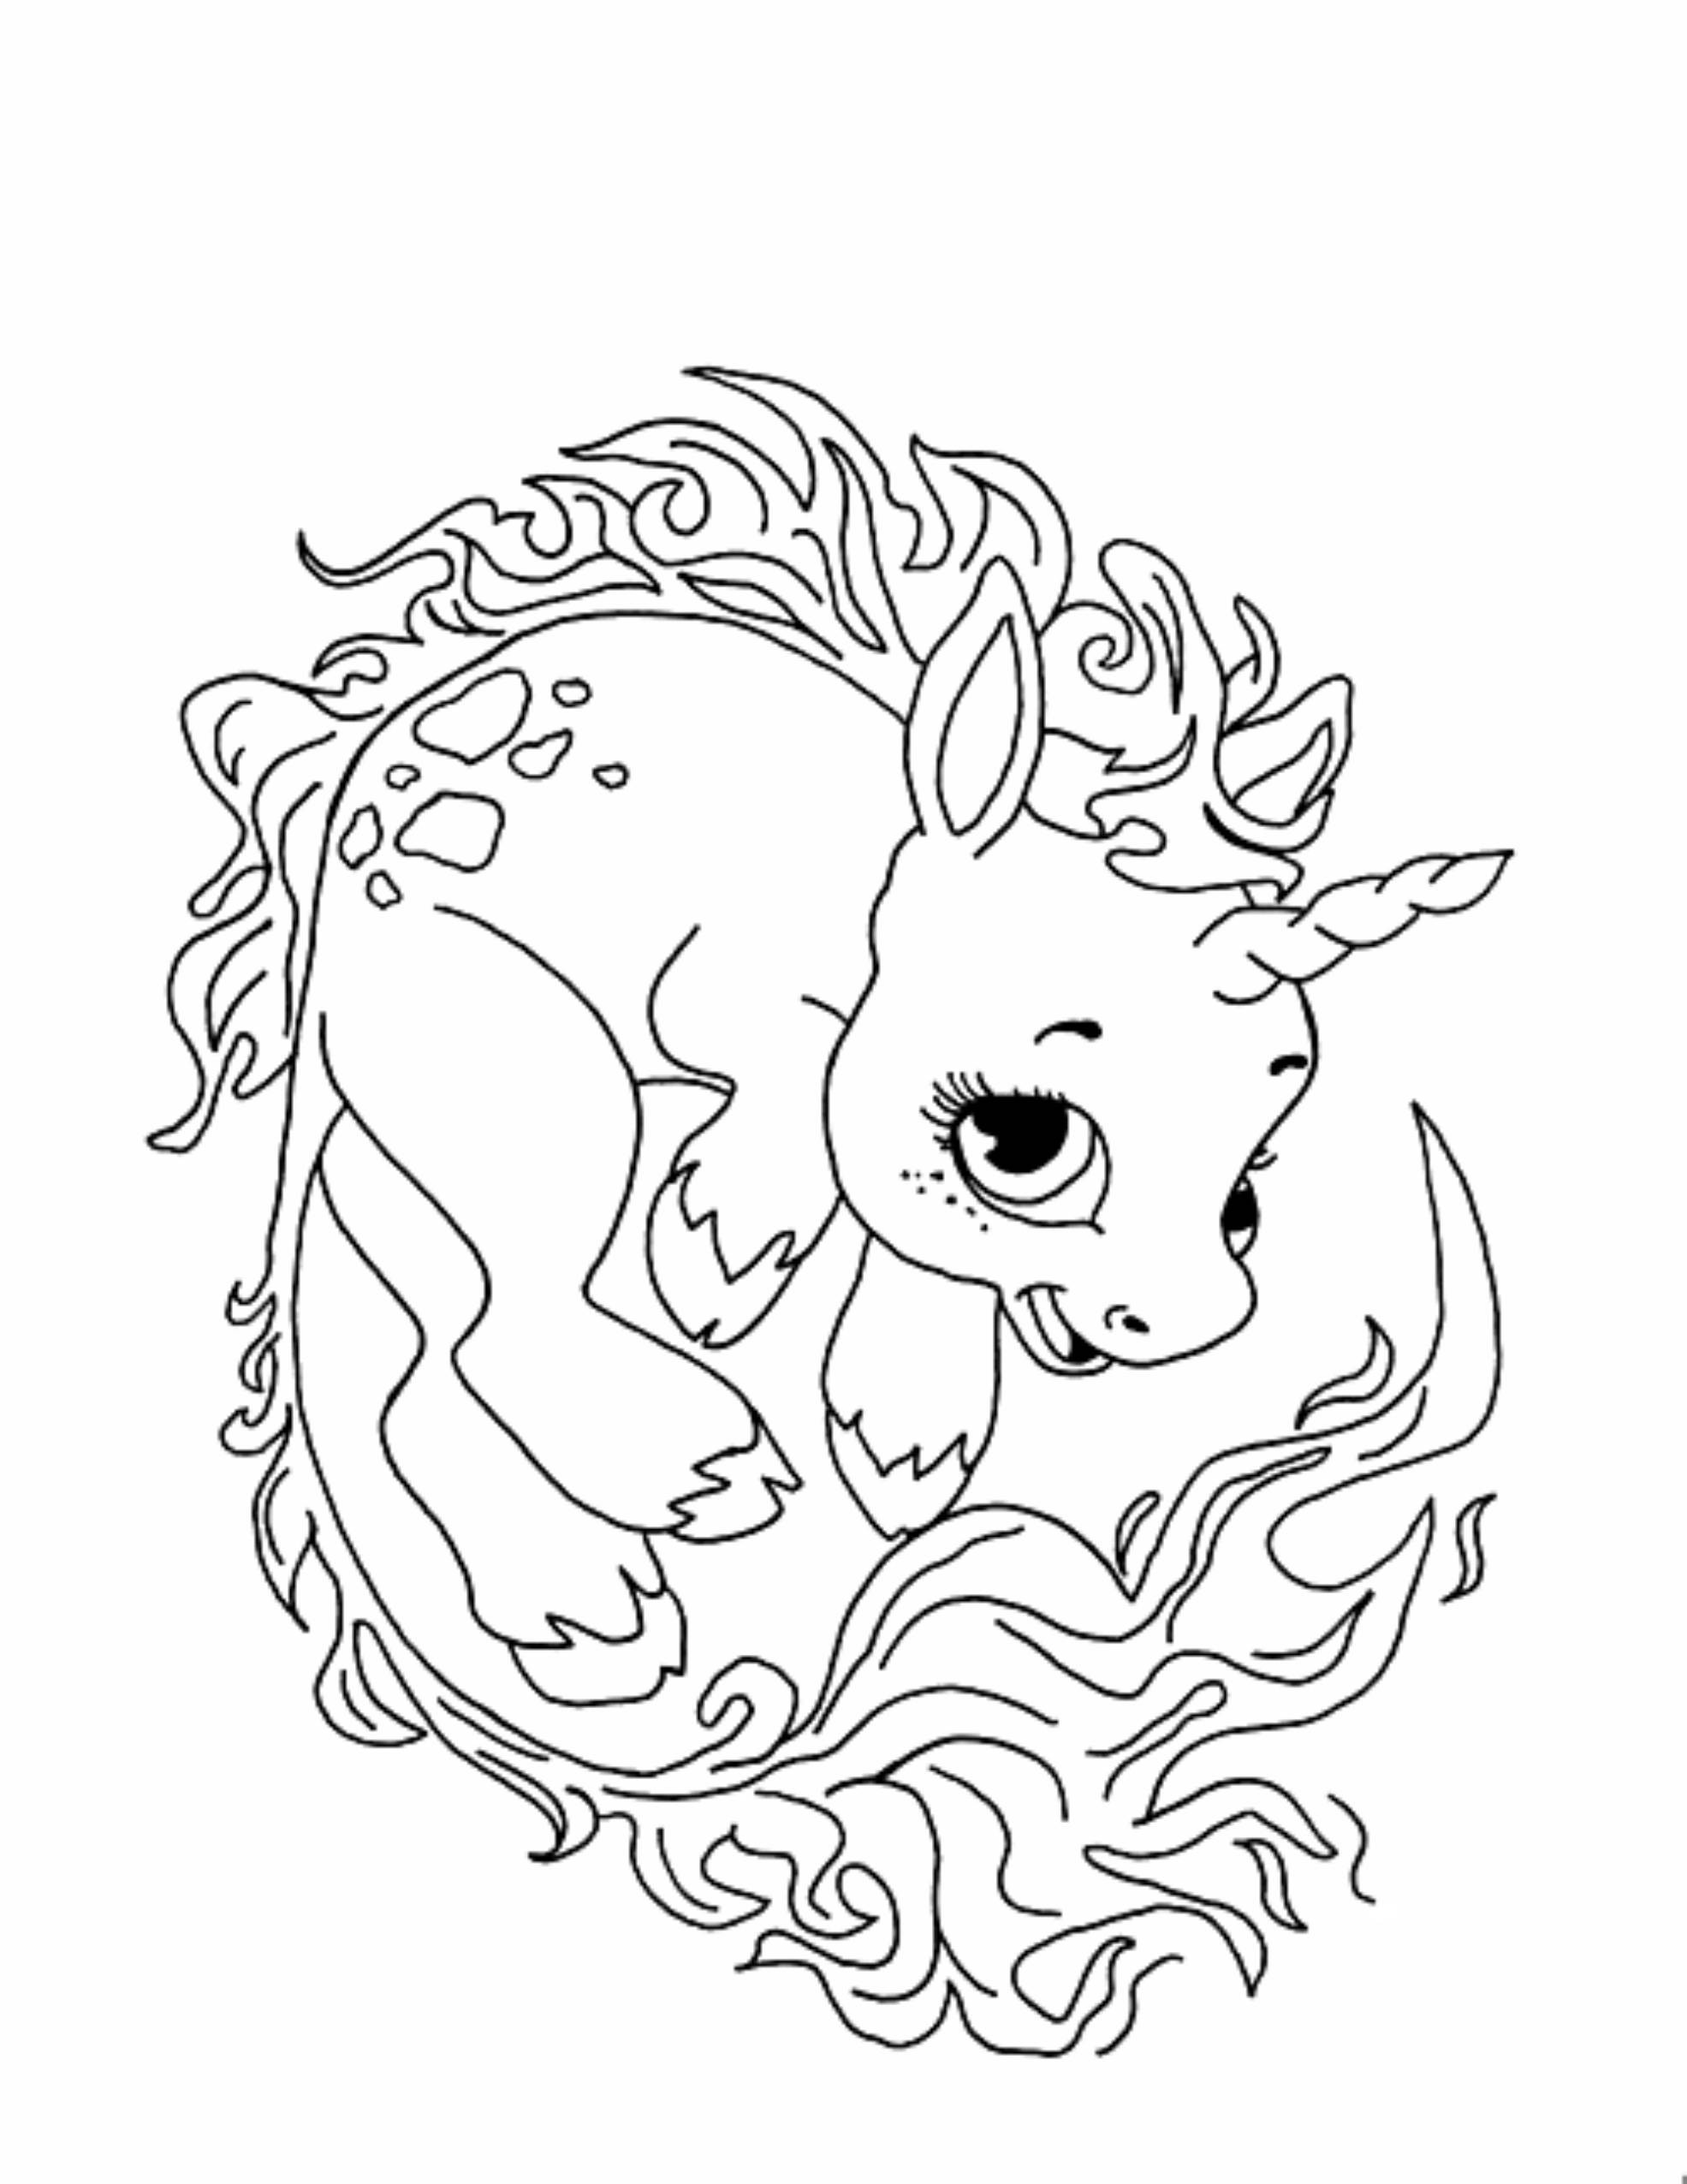 Coloring Pages Of Cute Baby Unicorns
 Print & Download Unicorn Coloring Pages for Children